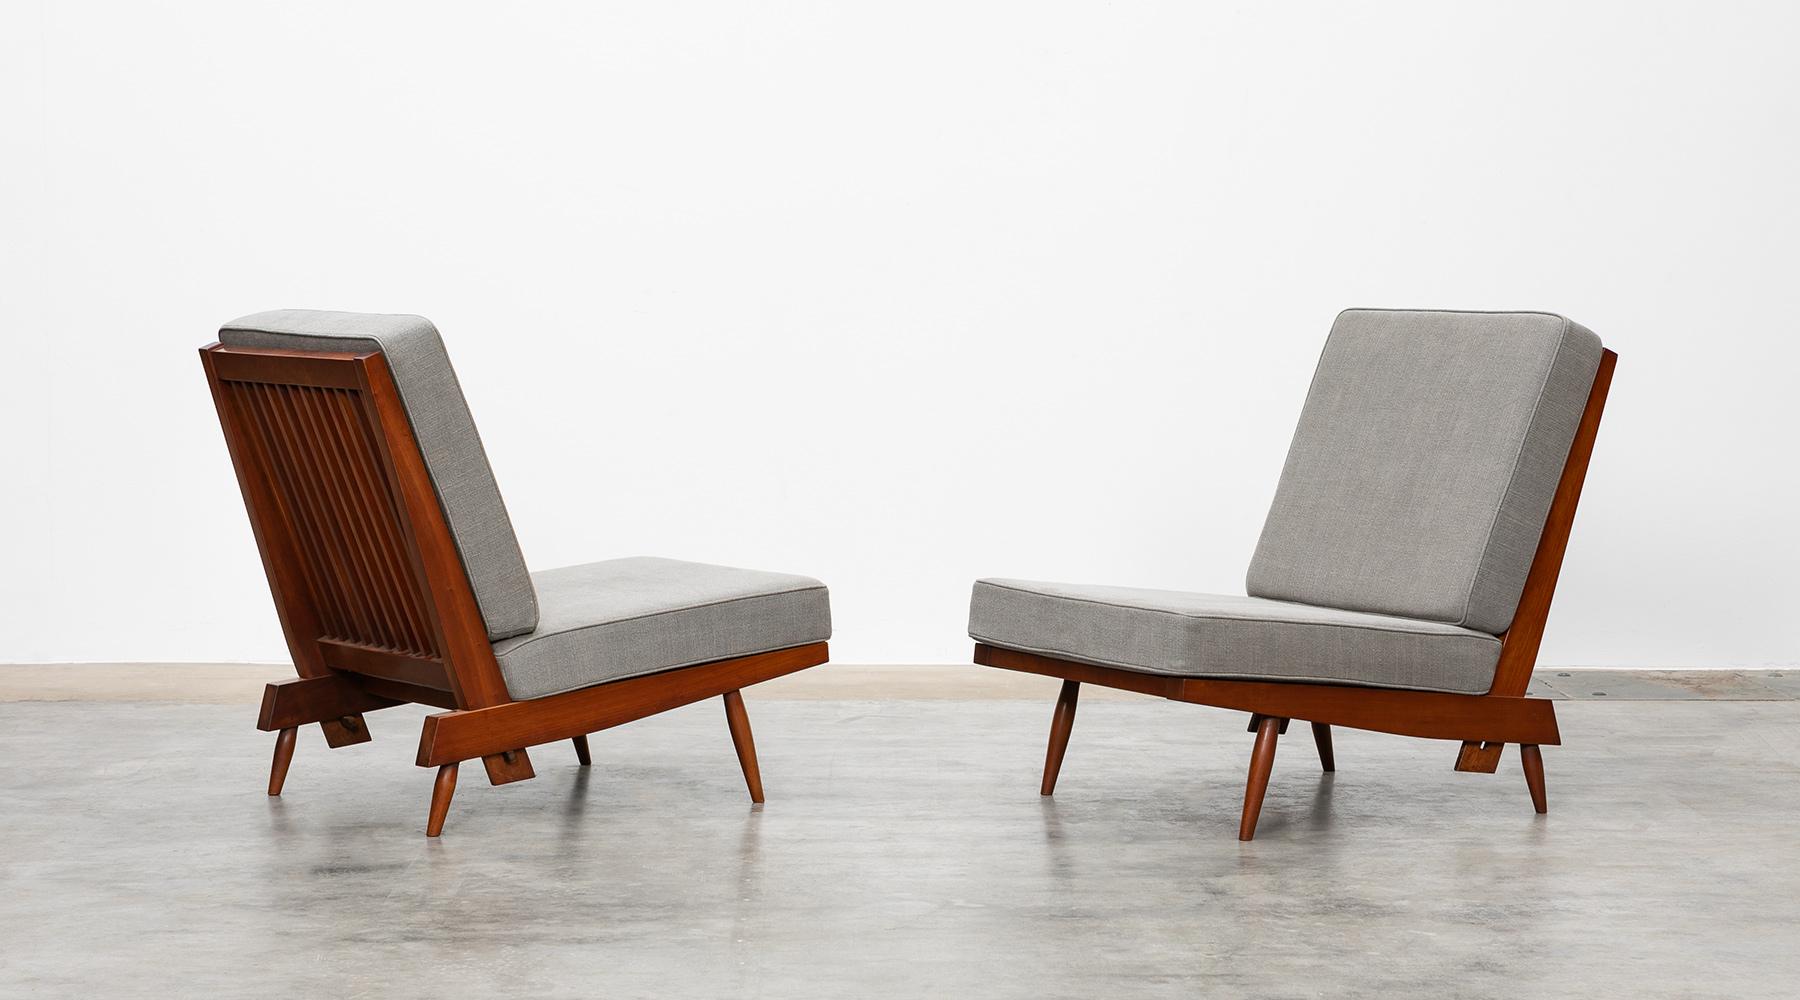 Lounge chairs, walnut, new upholstery in grey by George Nakashima, USA, 1962.

Magnificent set of lounge chairs crafted from American walnut by George Nakashima himself in elaborate handwork. The light feet and frame combined with the generous